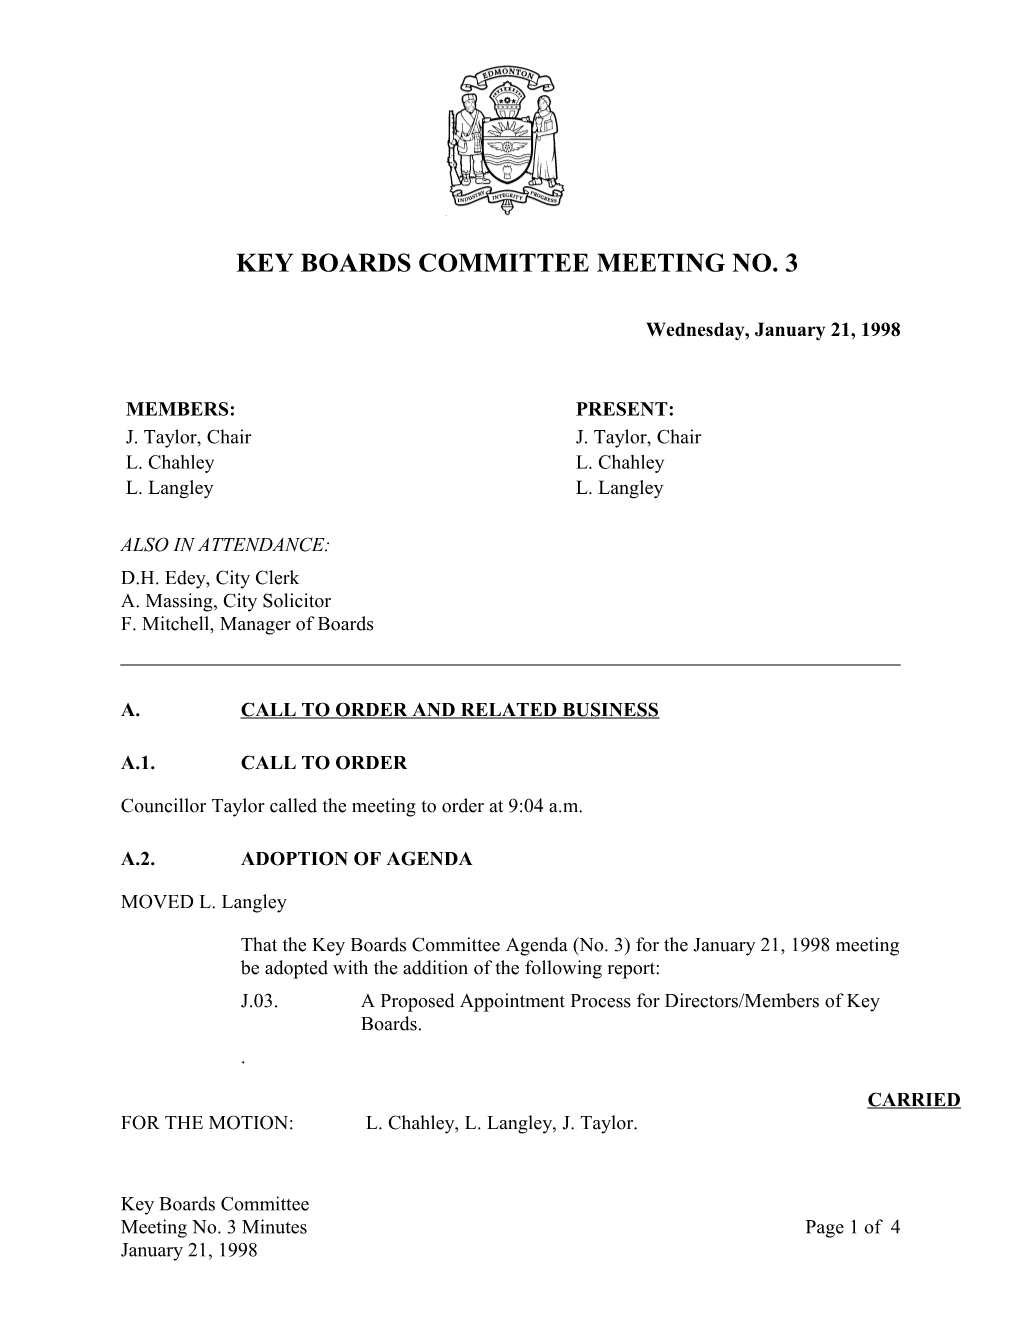 Minutes for Key Boards Committee January 21, 1998 Meeting